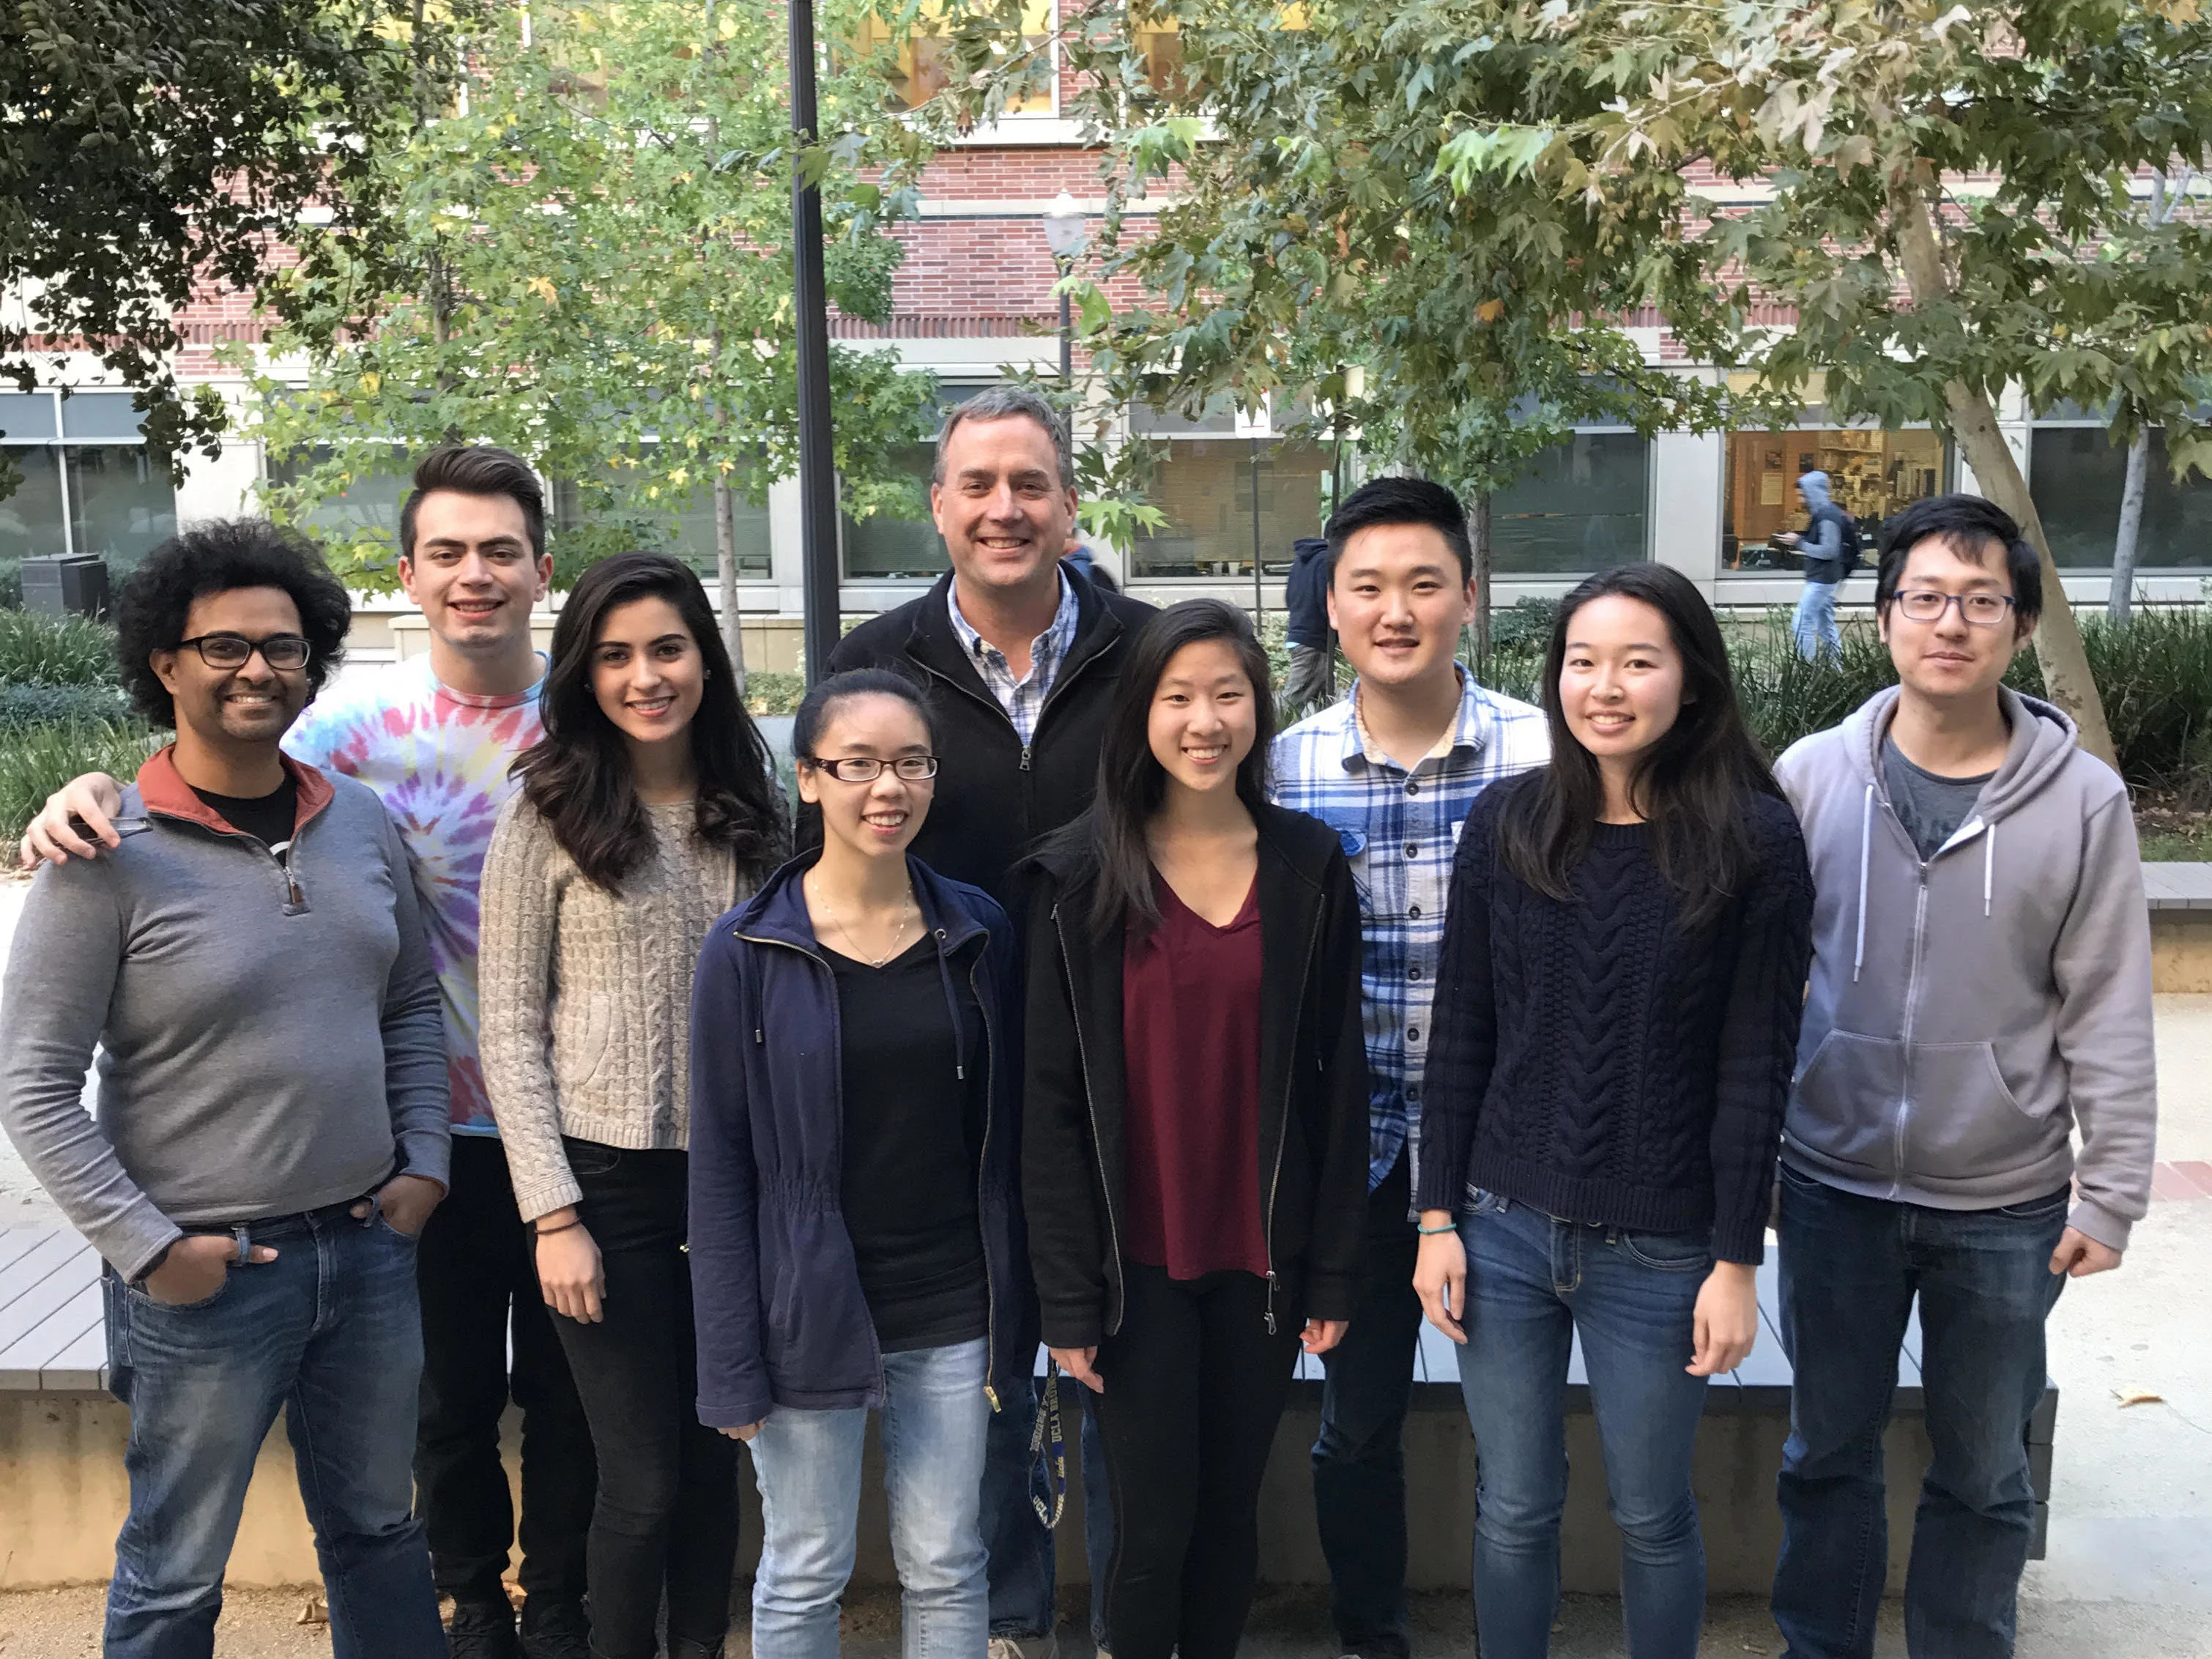 Outdoor group photo outside Molecular Science Building. Taken Fall 2018.